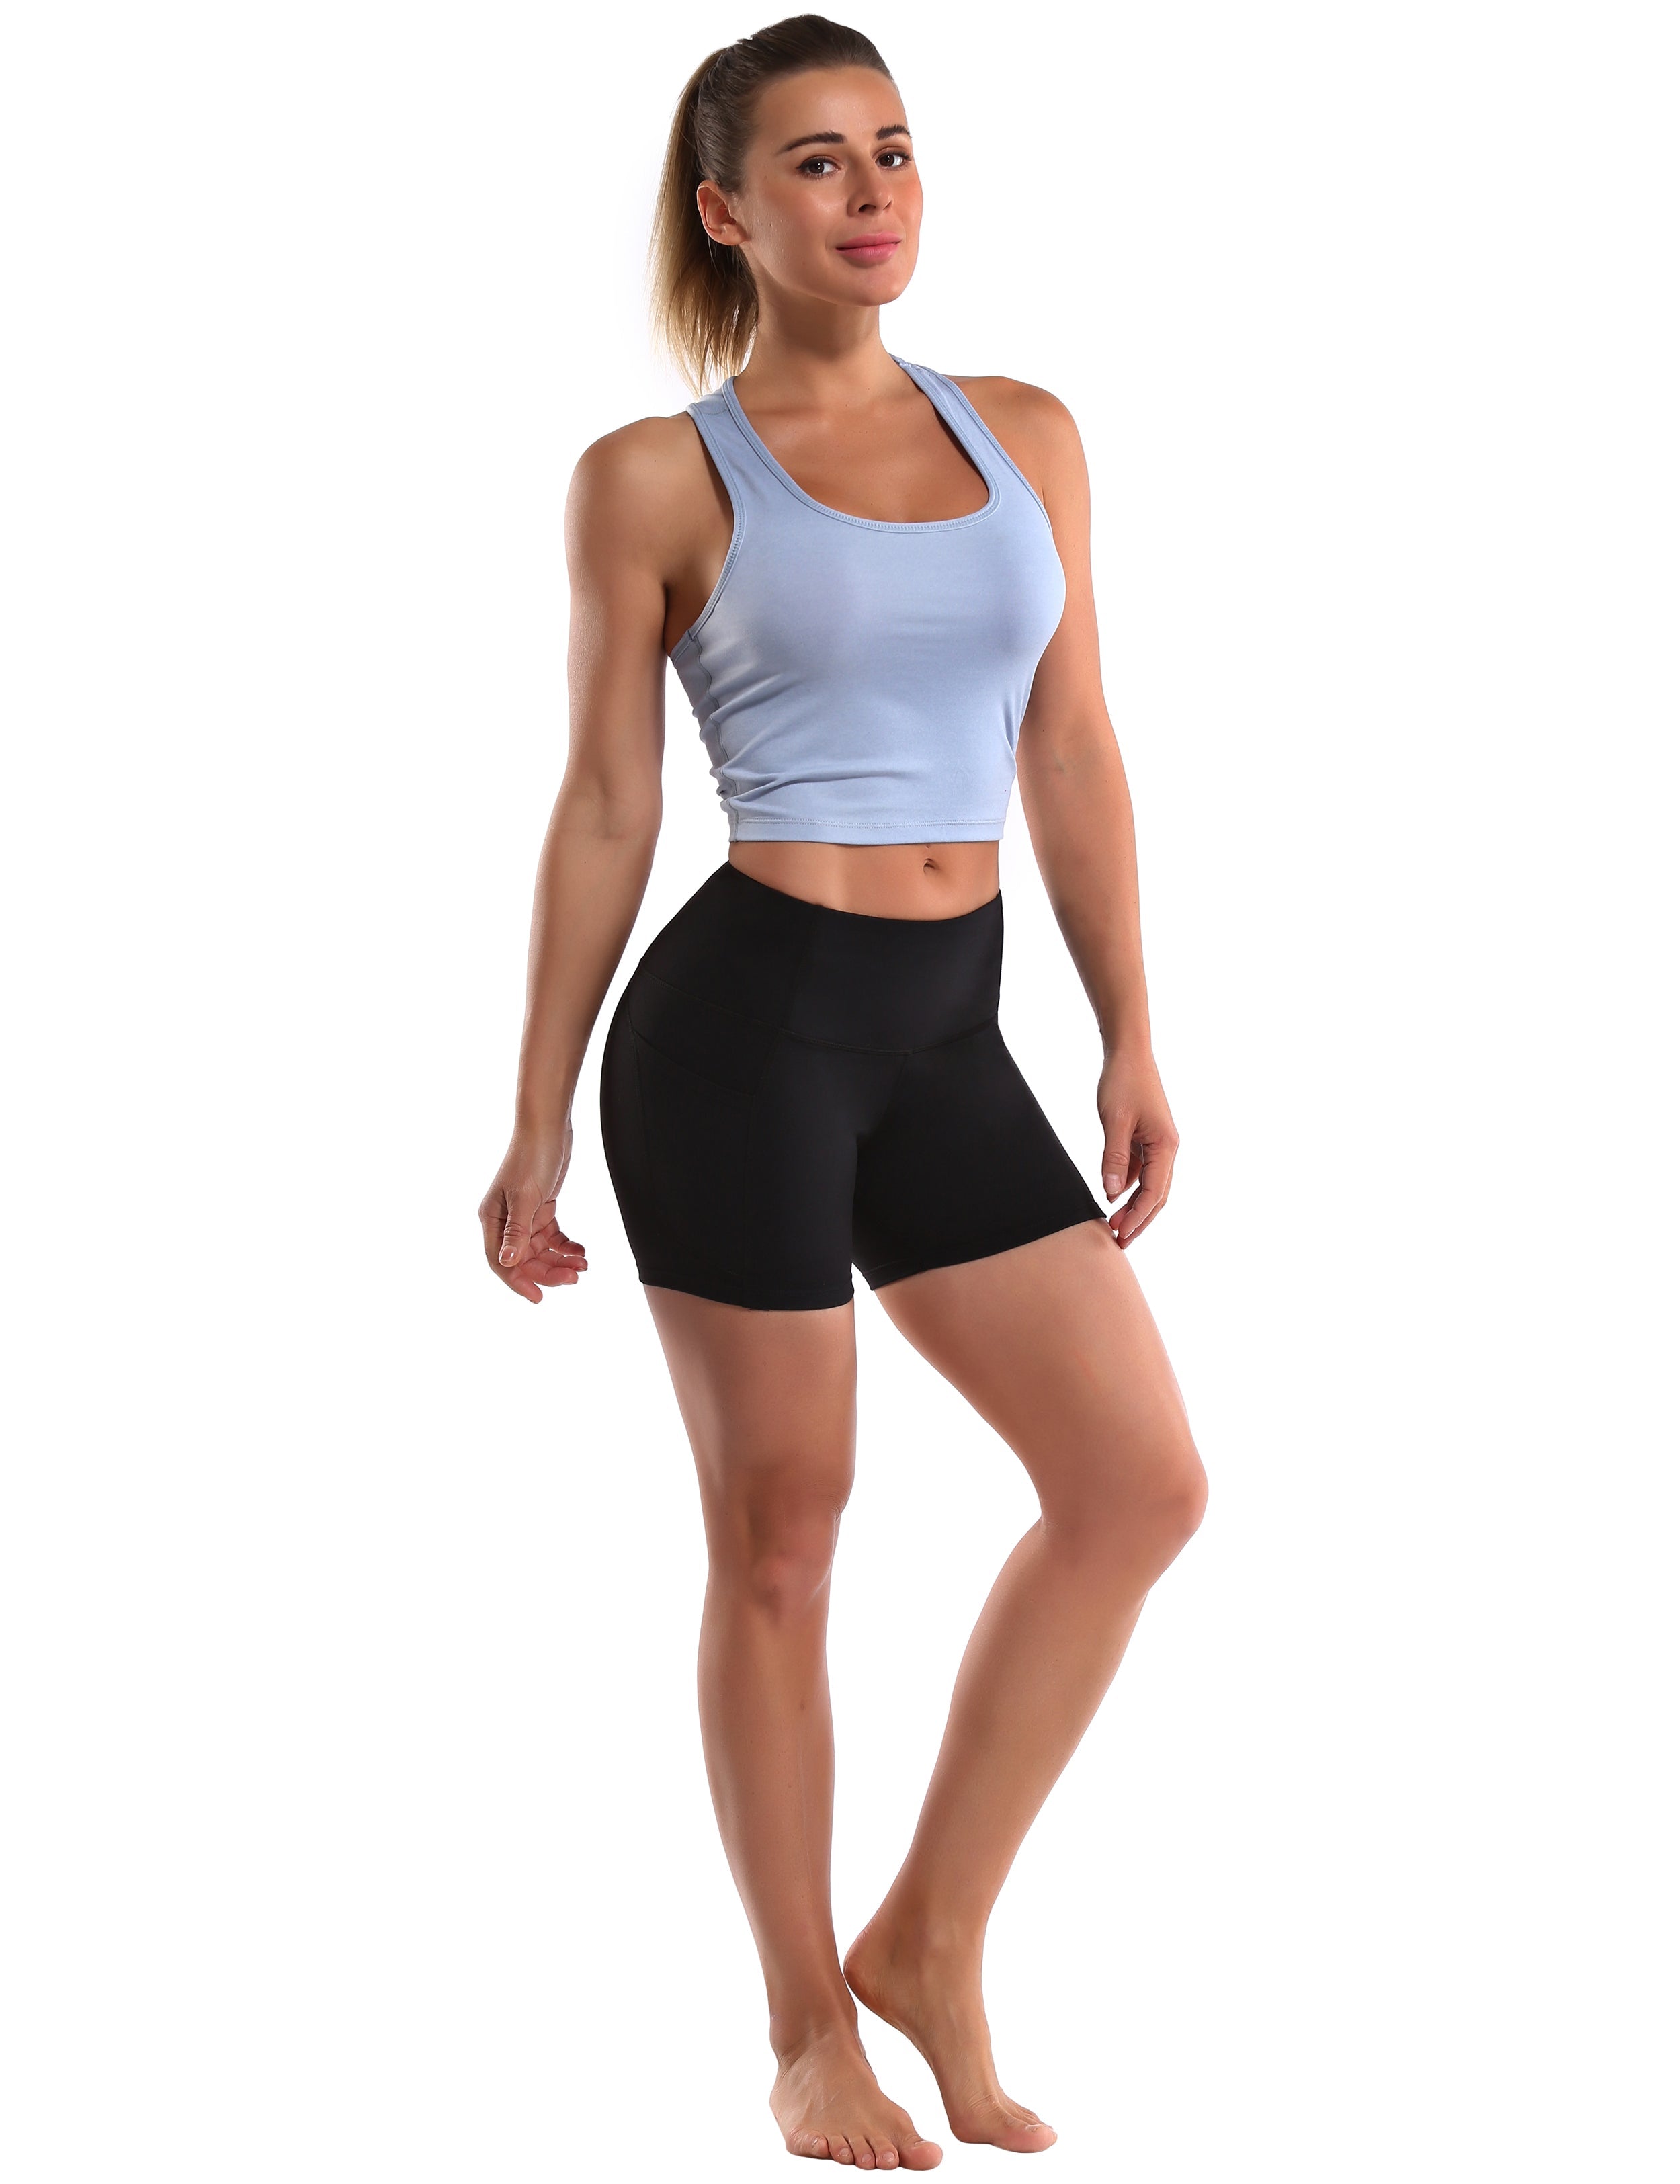 High Waist Side Pockets yogastudio Shorts black Softest-ever fabric High elasticity 4-way stretch Fabric doesn't attract lint easily No see-through Moisture-wicking Machine wash 88% Nylon, 12% Spandex